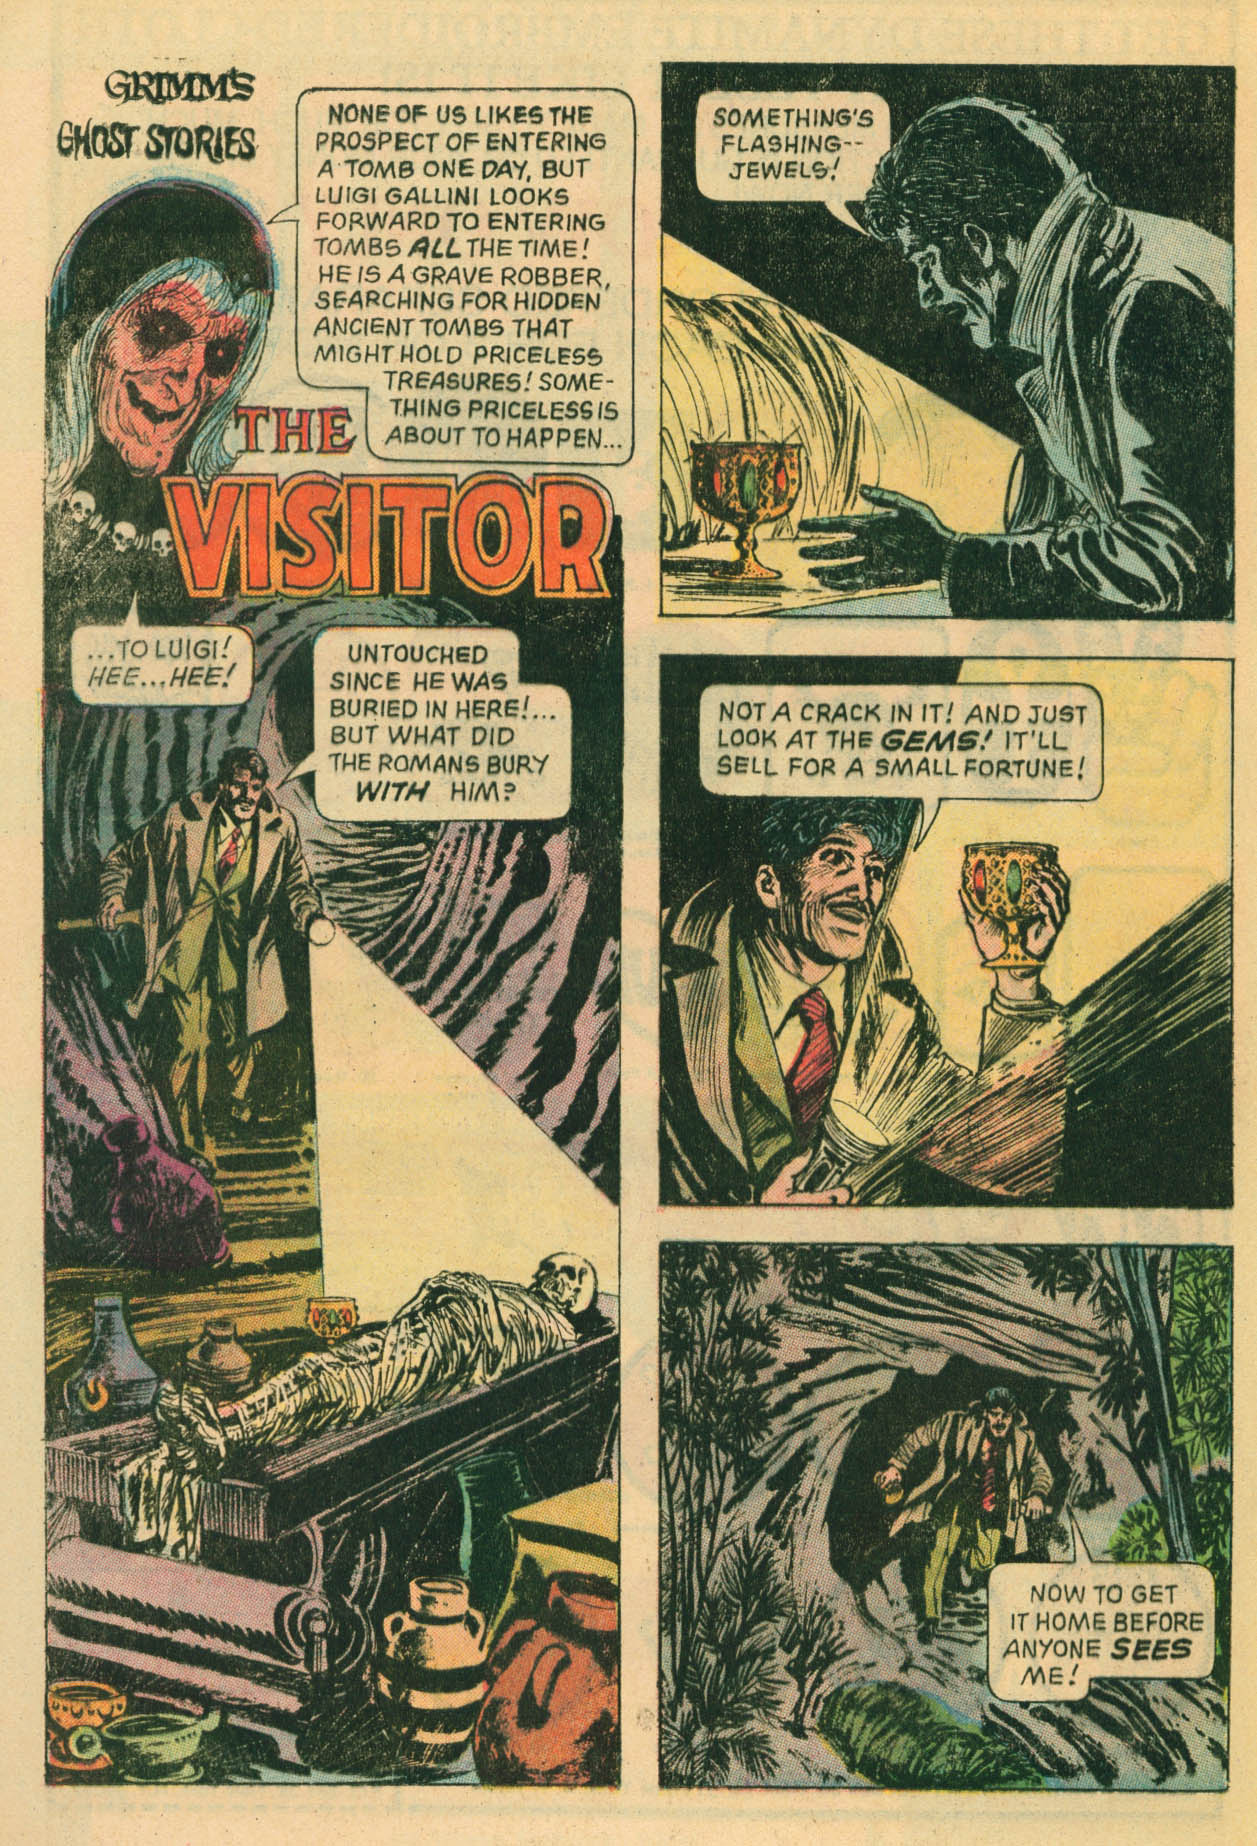 Read online Grimm's Ghost Stories comic -  Issue #14 - 15